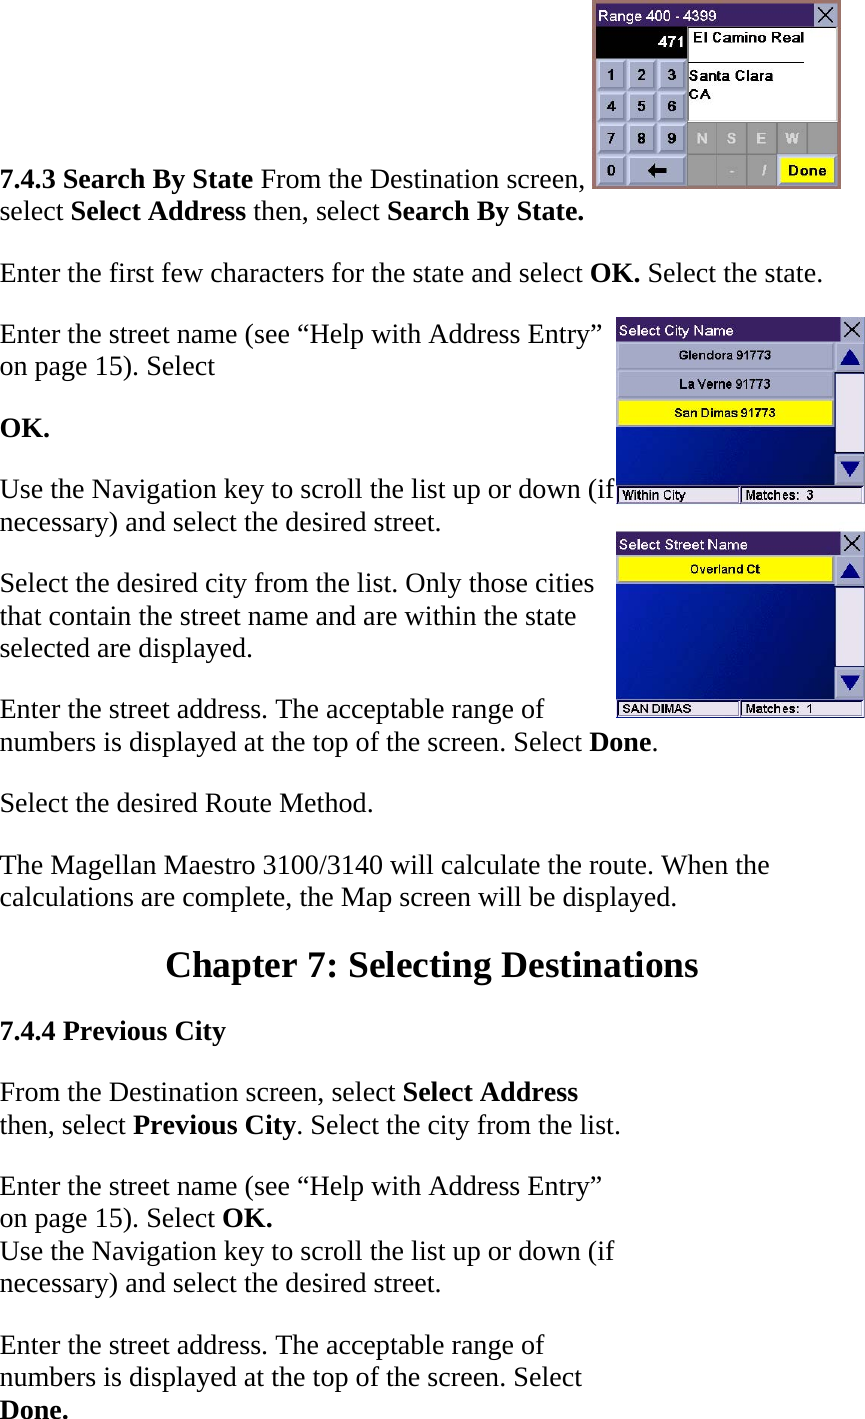 7.4.3 Search By State From the Destination screen, select Select Address then, select Search By State.  Enter the first few characters for the state and select OK. Select the state.  Enter the street name (see “Help with Address Entry” on page 15). Select  OK.  Use the Navigation key to scroll the list up or down (if necessary) and select the desired street.  Select the desired city from the list. Only those cities that contain the street name and are within the state selected are displayed.  Enter the street address. The acceptable range of numbers is displayed at the top of the screen. Select Done.  Select the desired Route Method.  The Magellan Maestro 3100/3140 will calculate the route. When the calculations are complete, the Map screen will be displayed.  Chapter 7: Selecting Destinations  7.4.4 Previous City  From the Destination screen, select Select Address then, select Previous City. Select the city from the list.  Enter the street name (see “Help with Address Entry”  on page 15). Select OK.  Use the Navigation key to scroll the list up or down (if necessary) and select the desired street.  Enter the street address. The acceptable range of numbers is displayed at the top of the screen. Select  Done.  